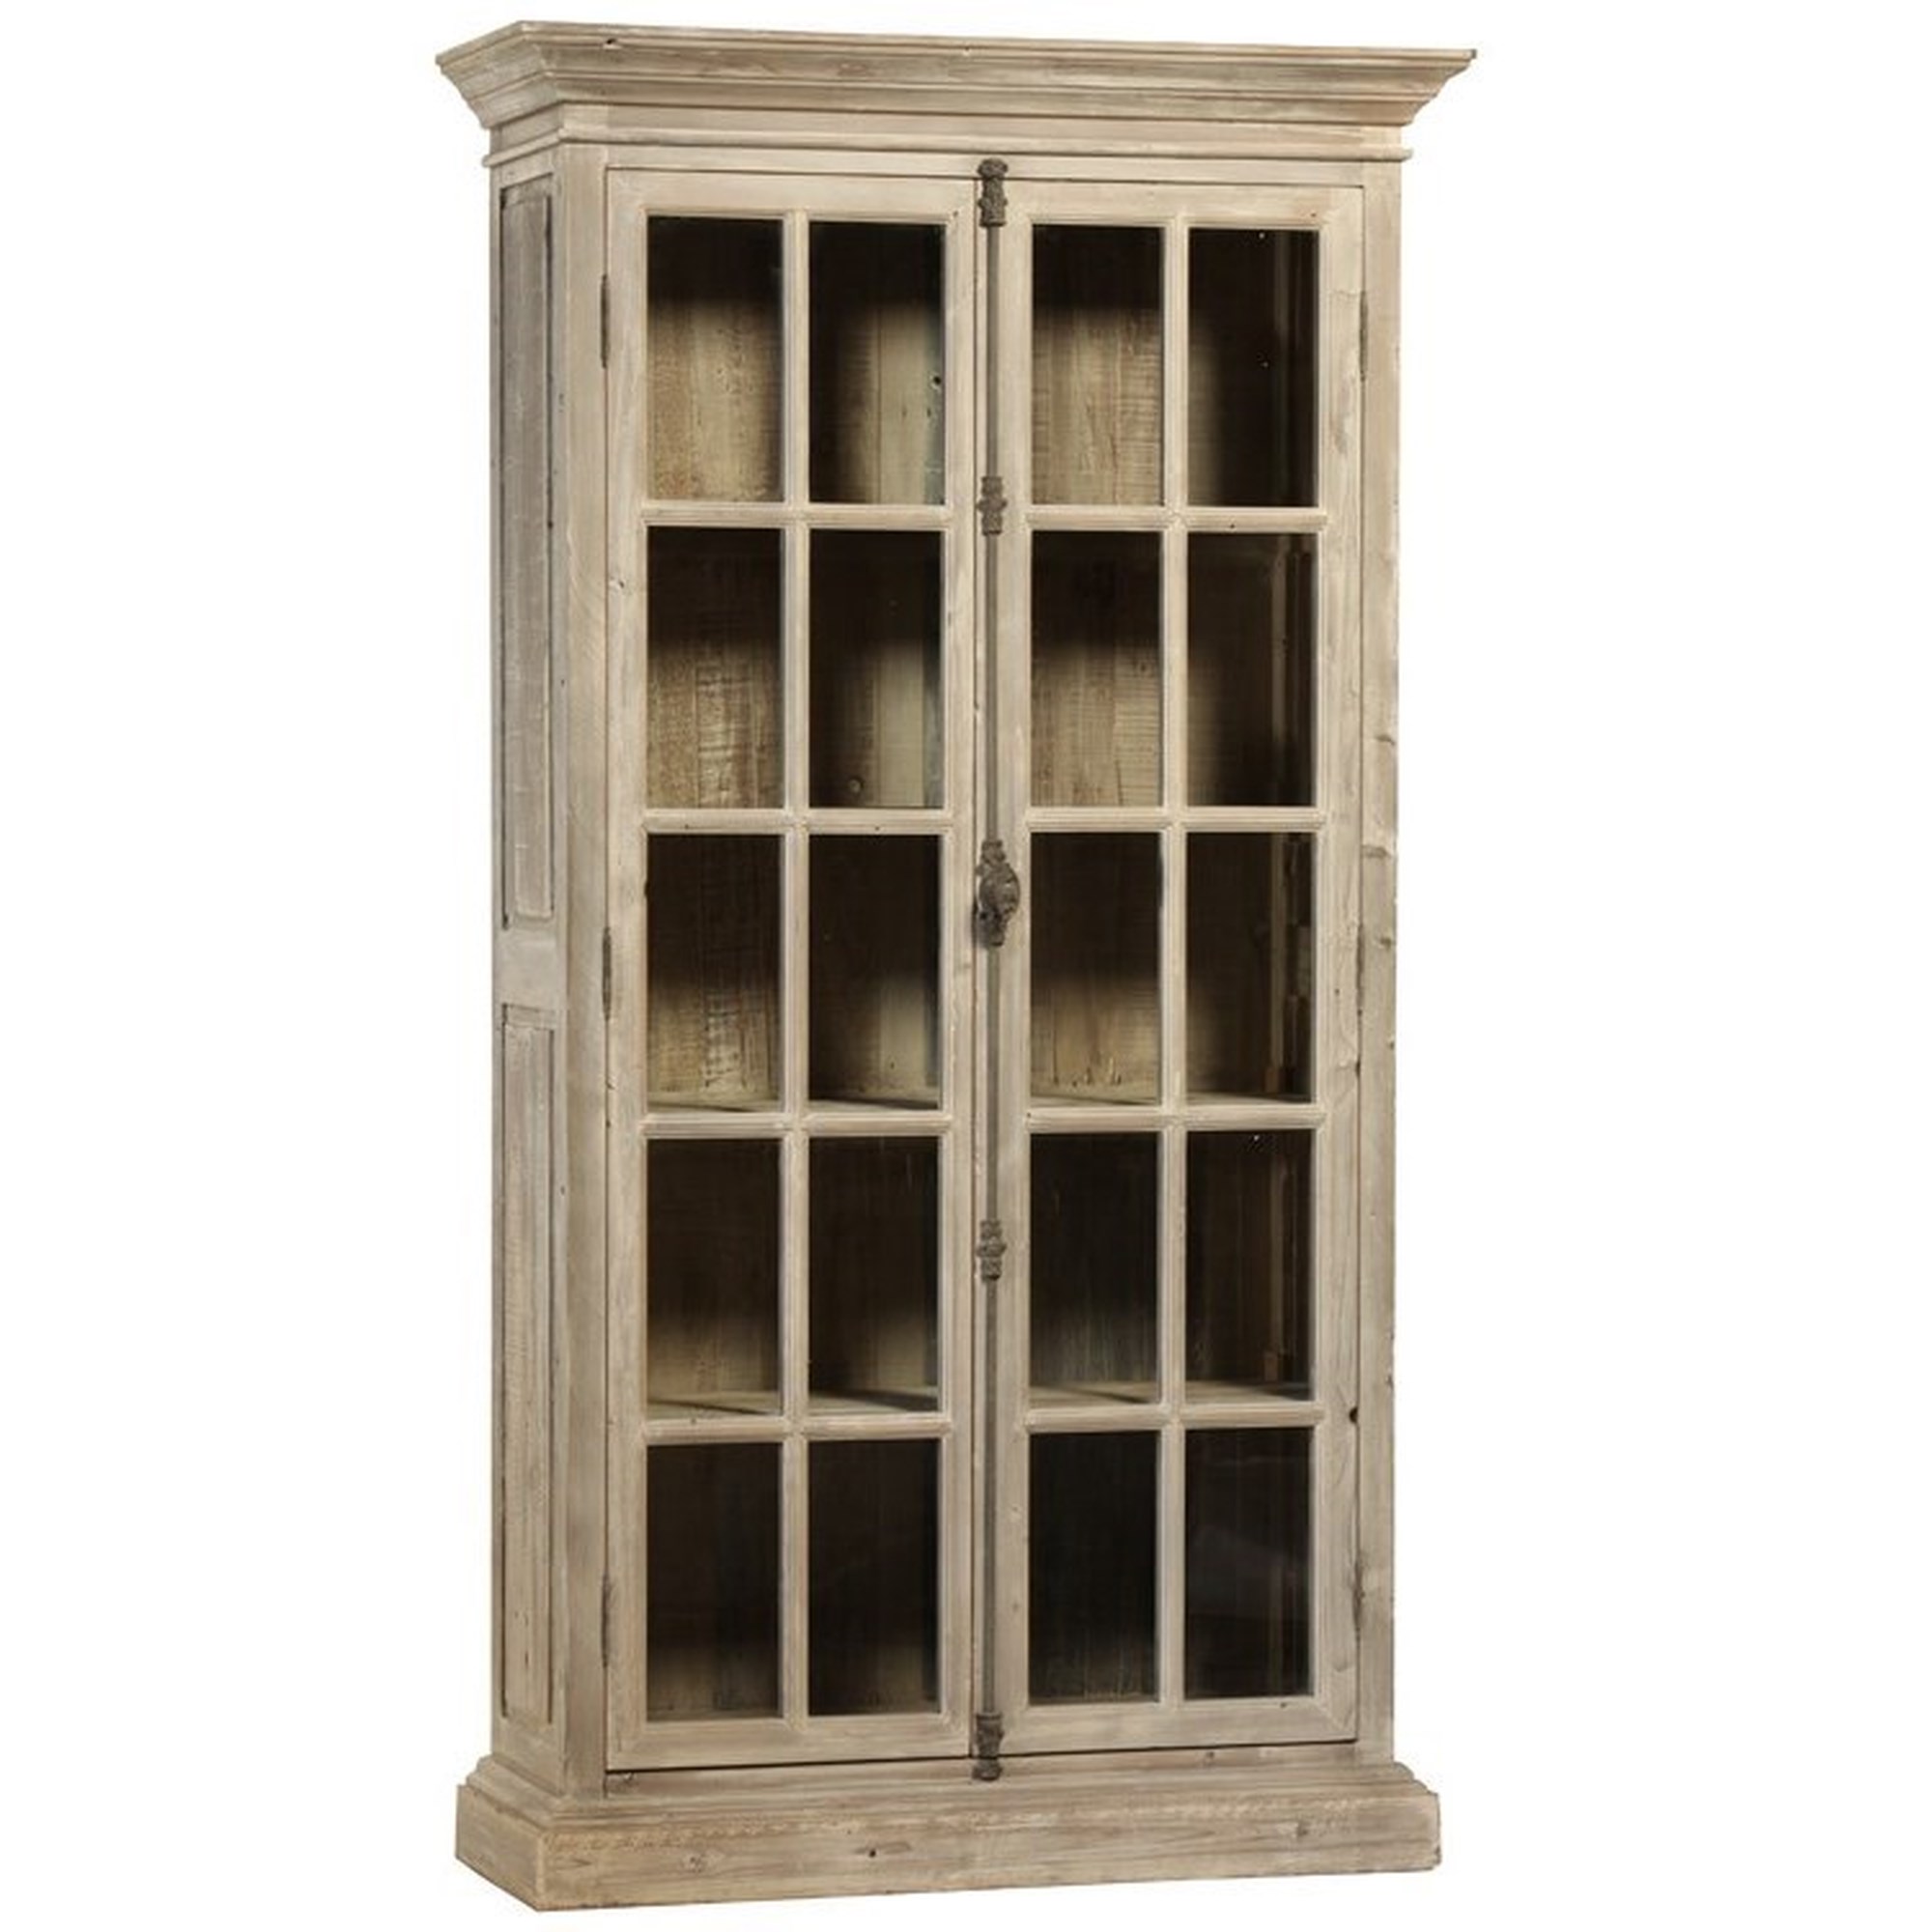 with Closed Removable Vincent Vitrine DOV349 Dovetail | Bookcases Relaxed | 4 Furniture Shelves Cabinets Furniture Vintage Weinberger\'s